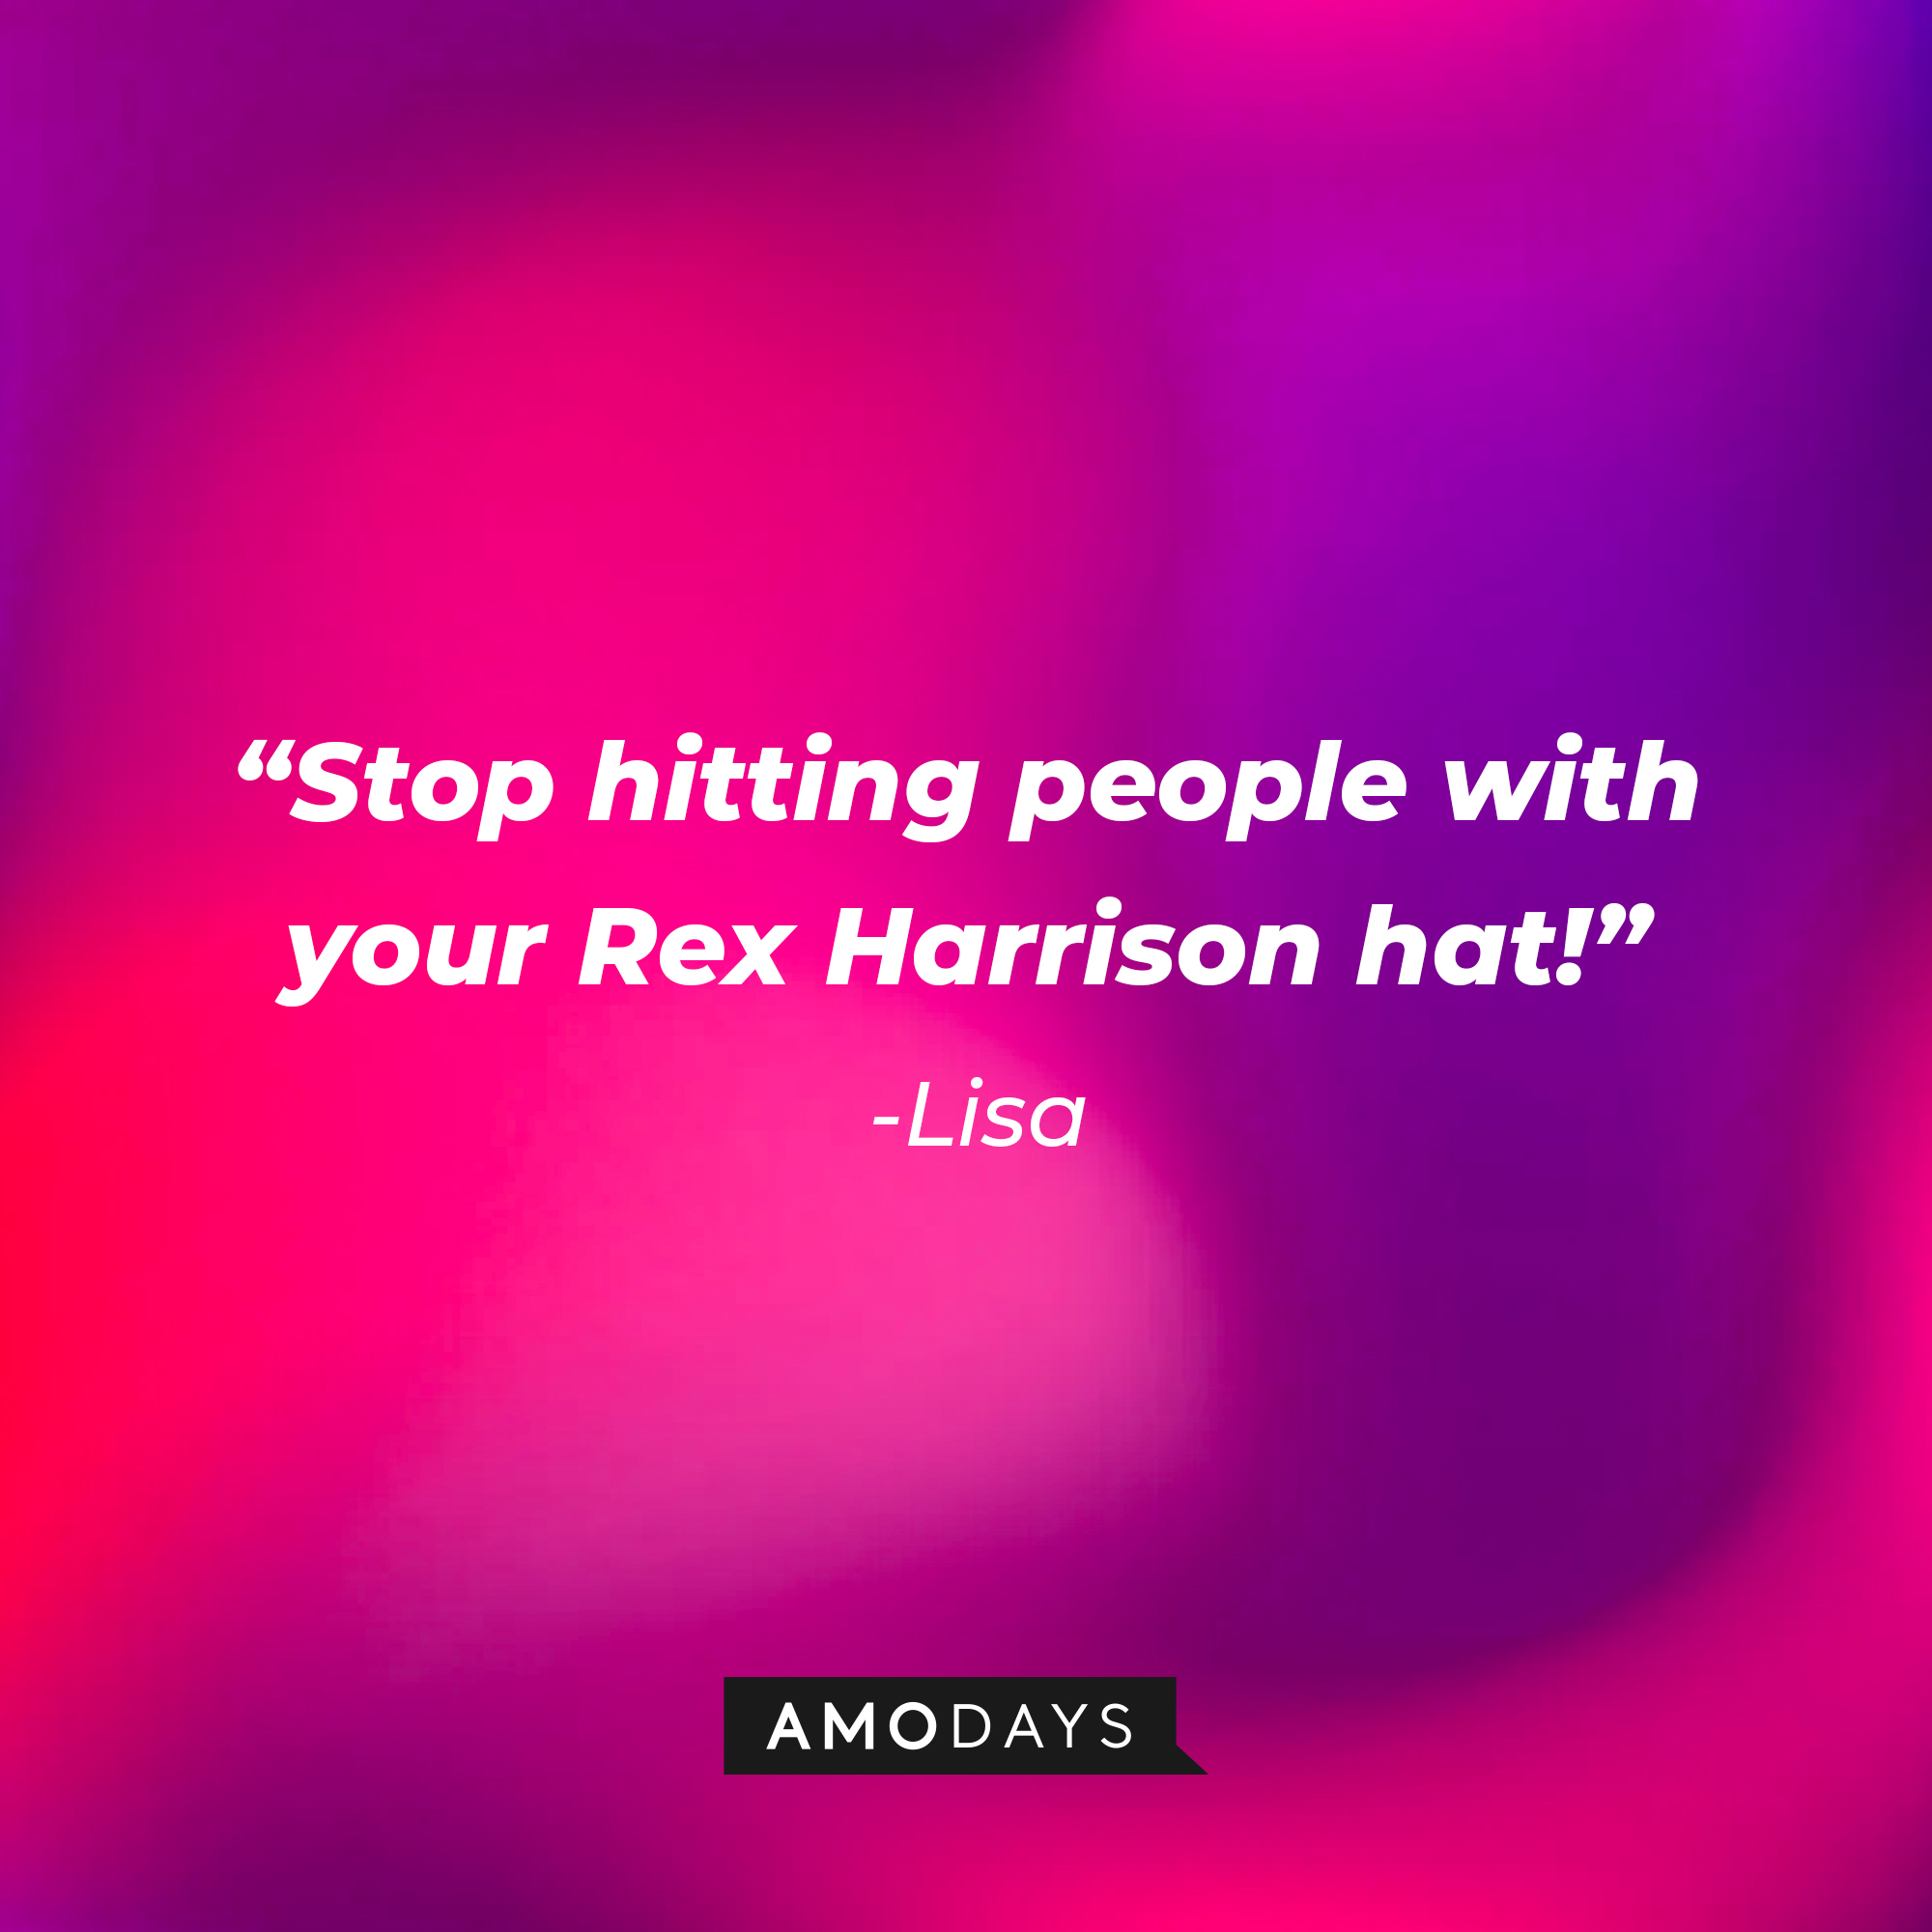 Lisa’s quote: “Stop hitting people with your Rex Harrison hat!” | Source: AmoDays